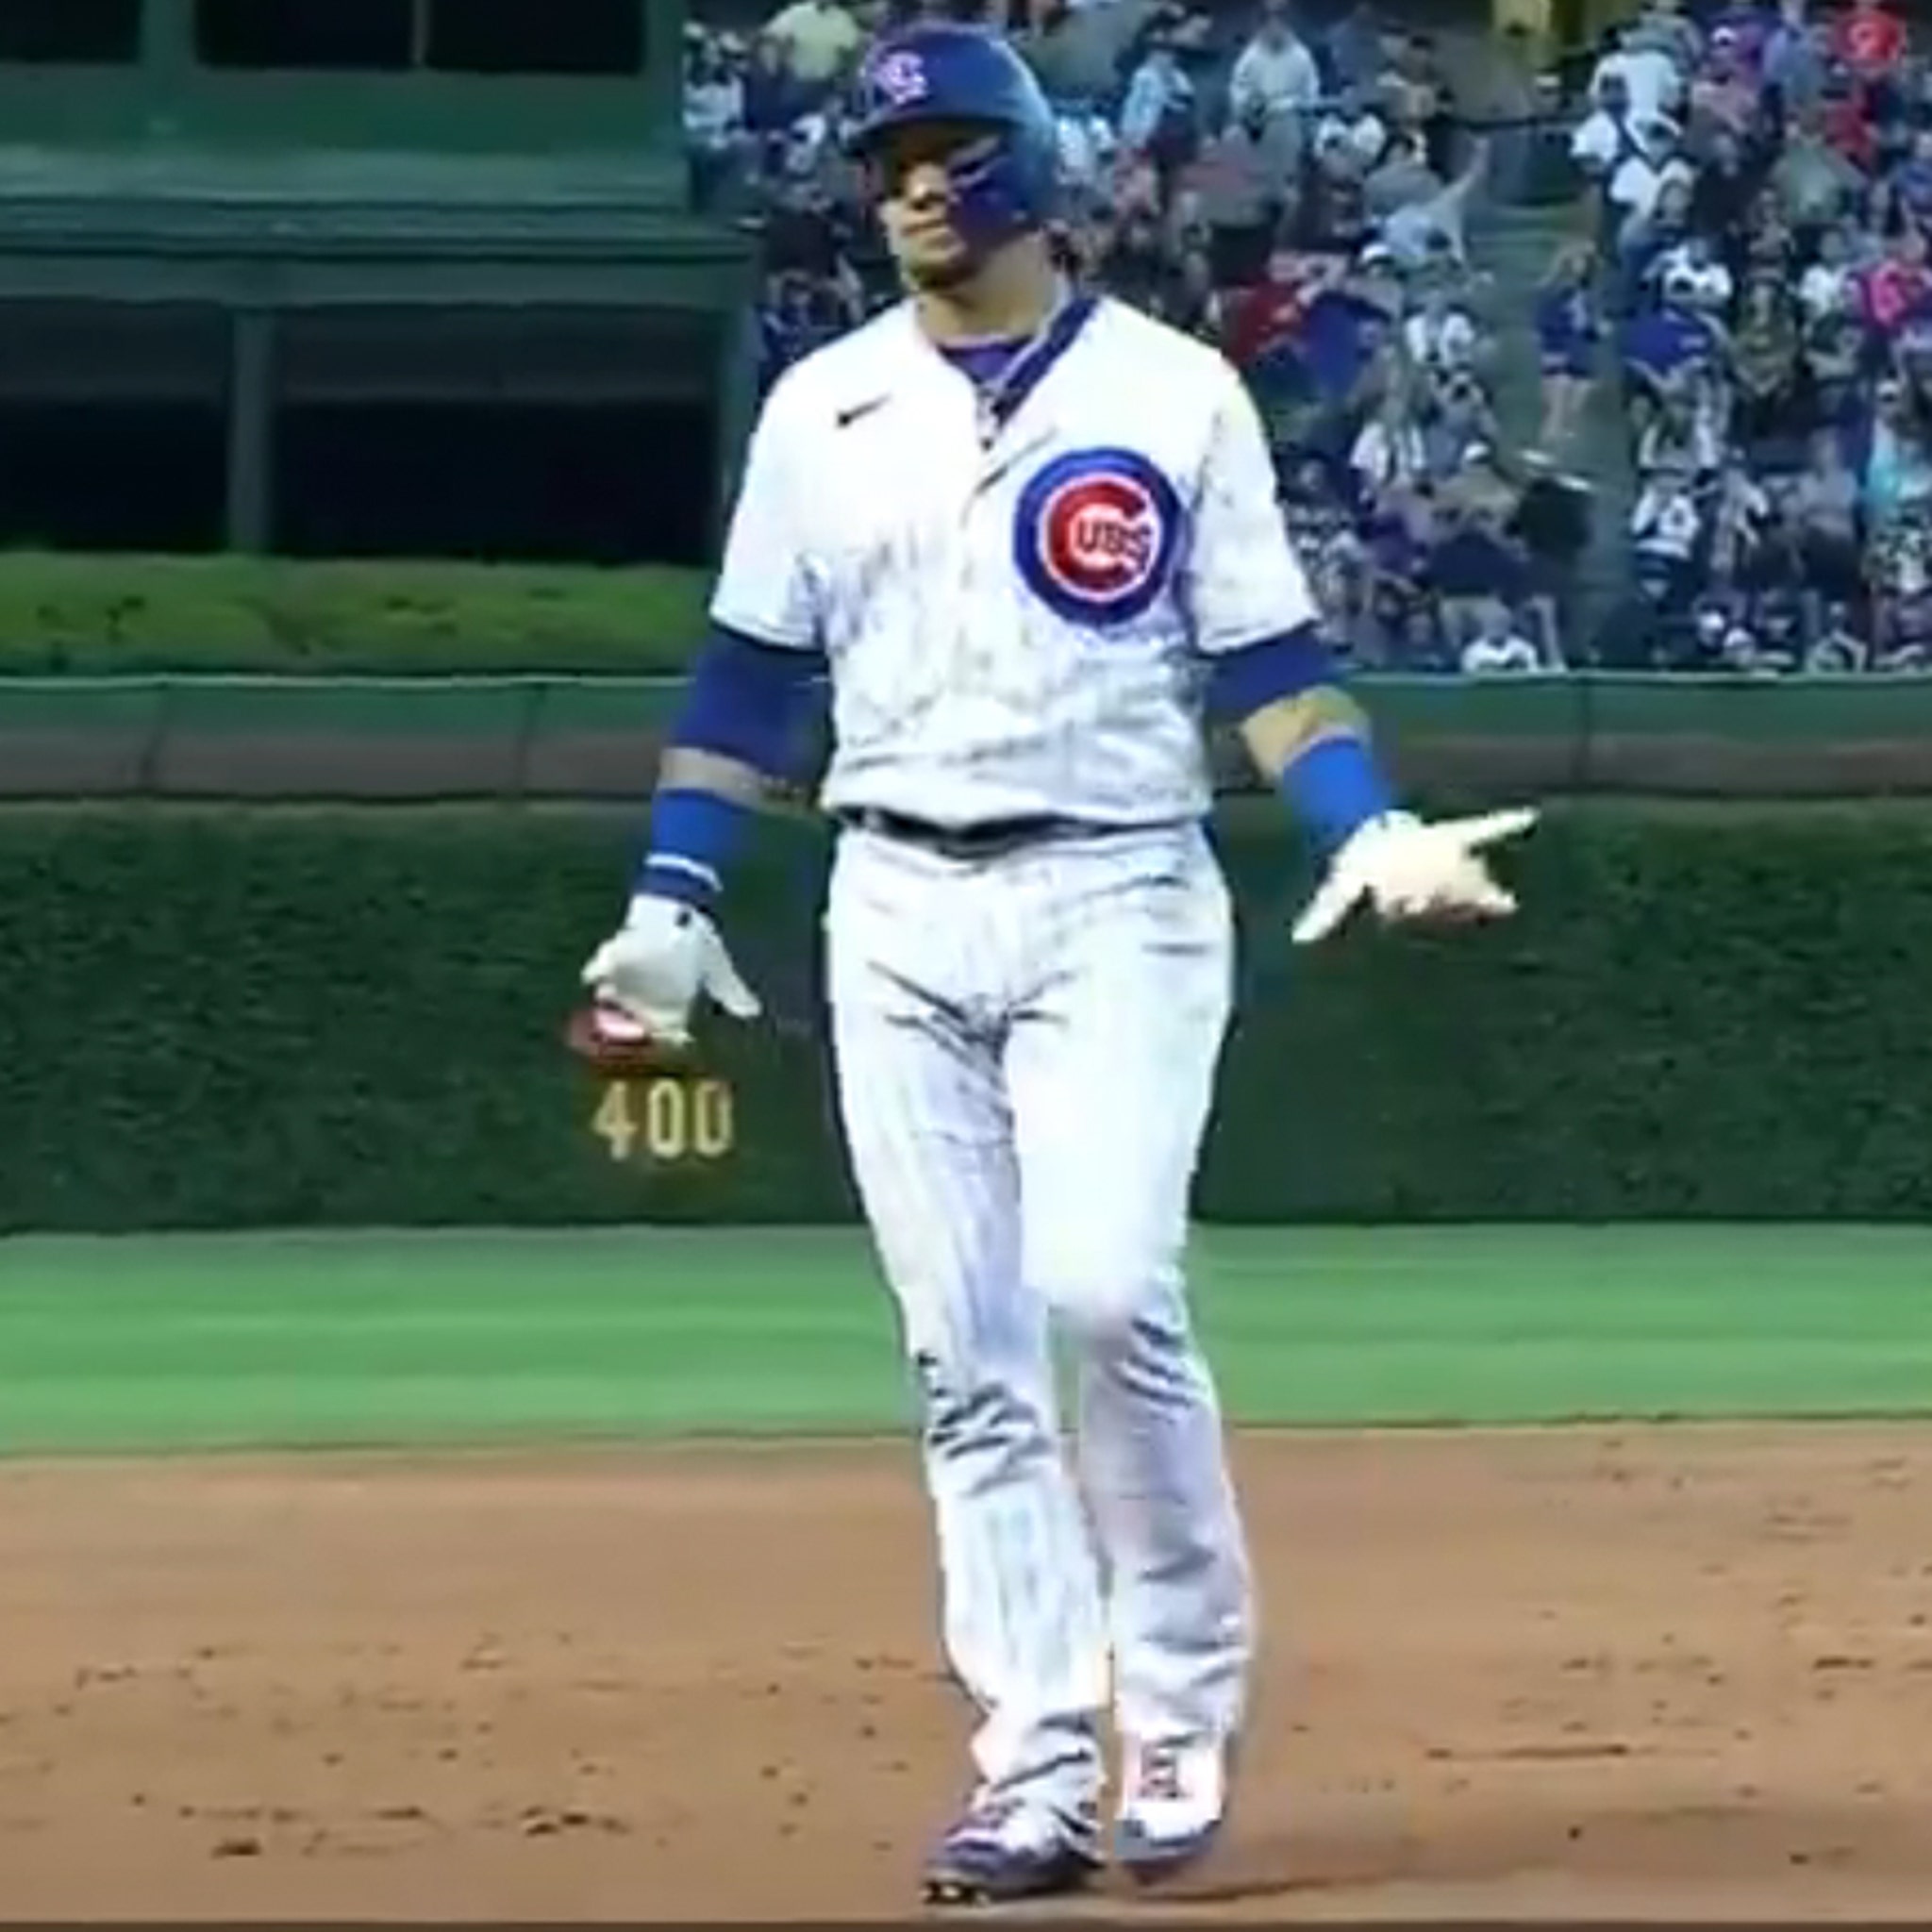 Cubs' Javier Baez Embarrassingly Forgets Outs In Inning, Benched Over Gaffe